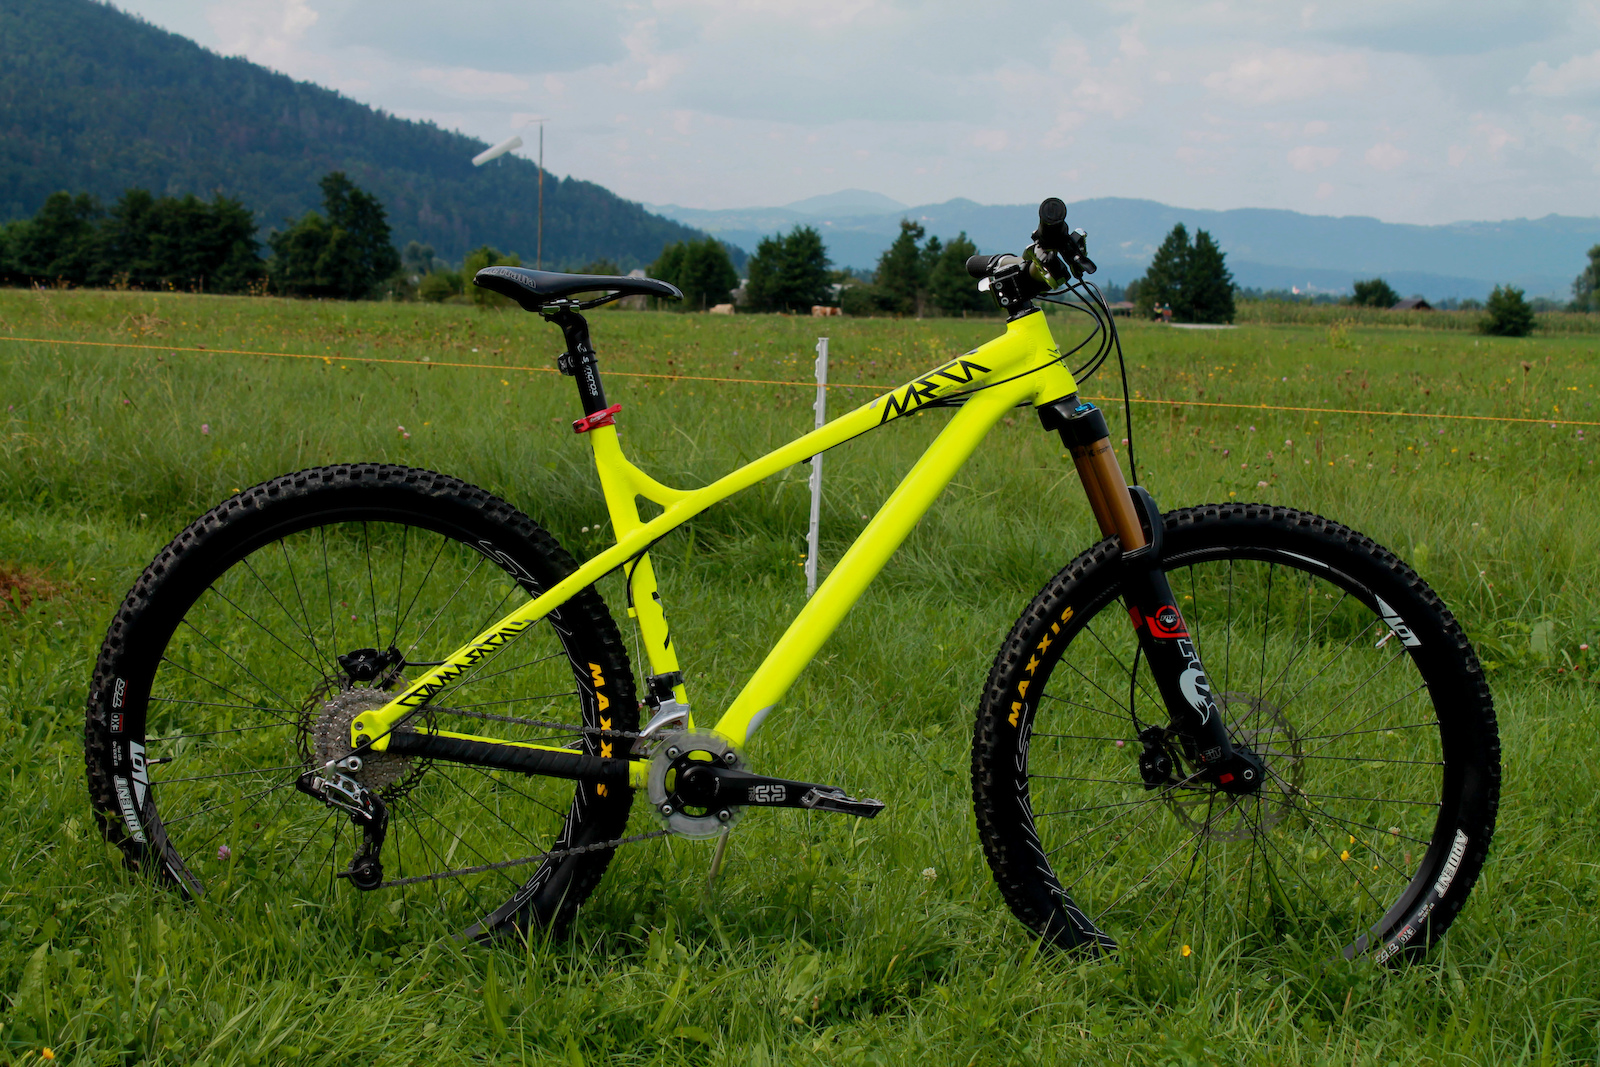 2014 Commencal Meta HT, large, as new!